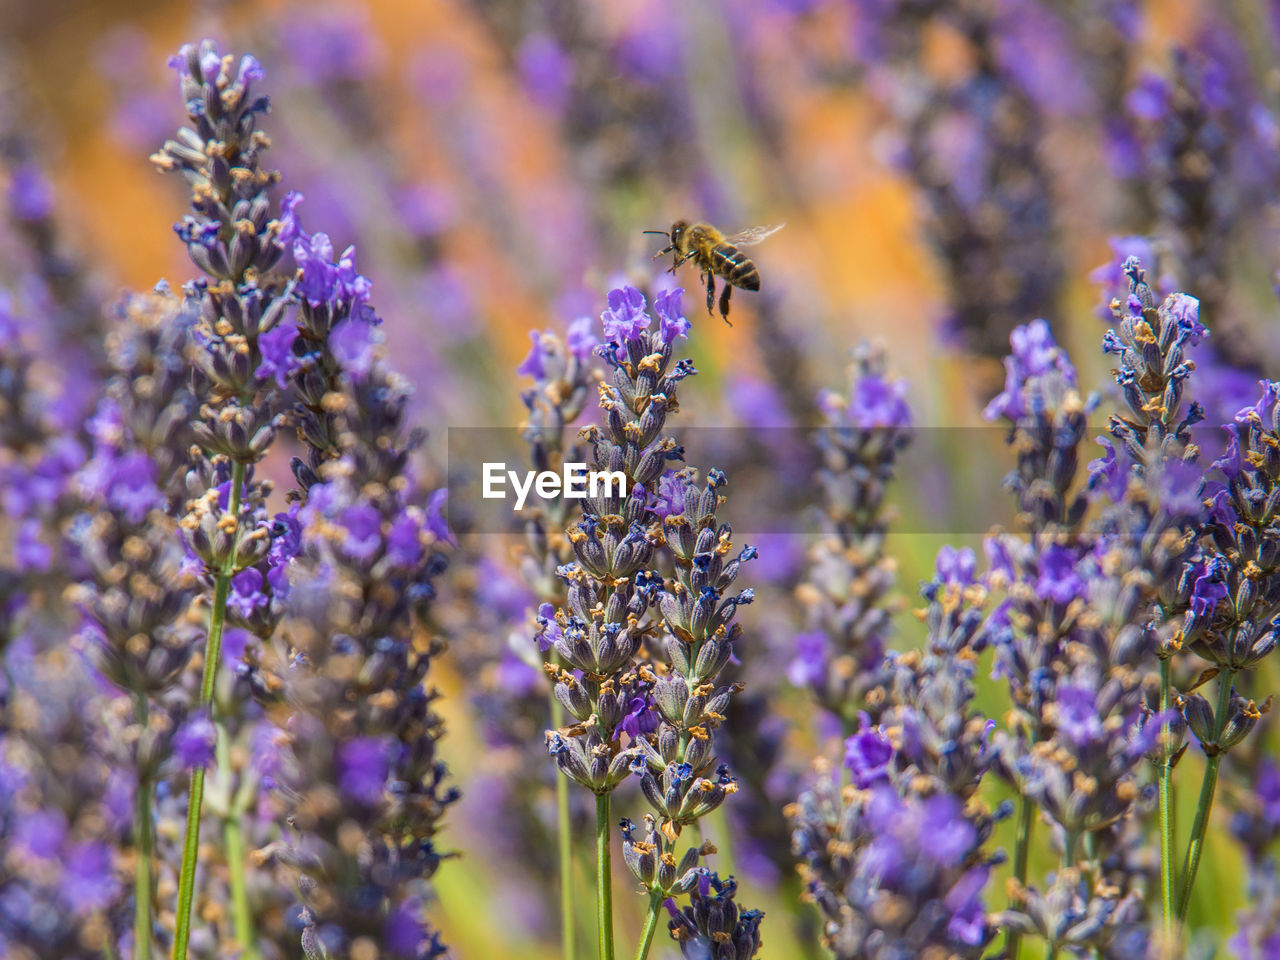 Lavenders with a bee pollinating the flower